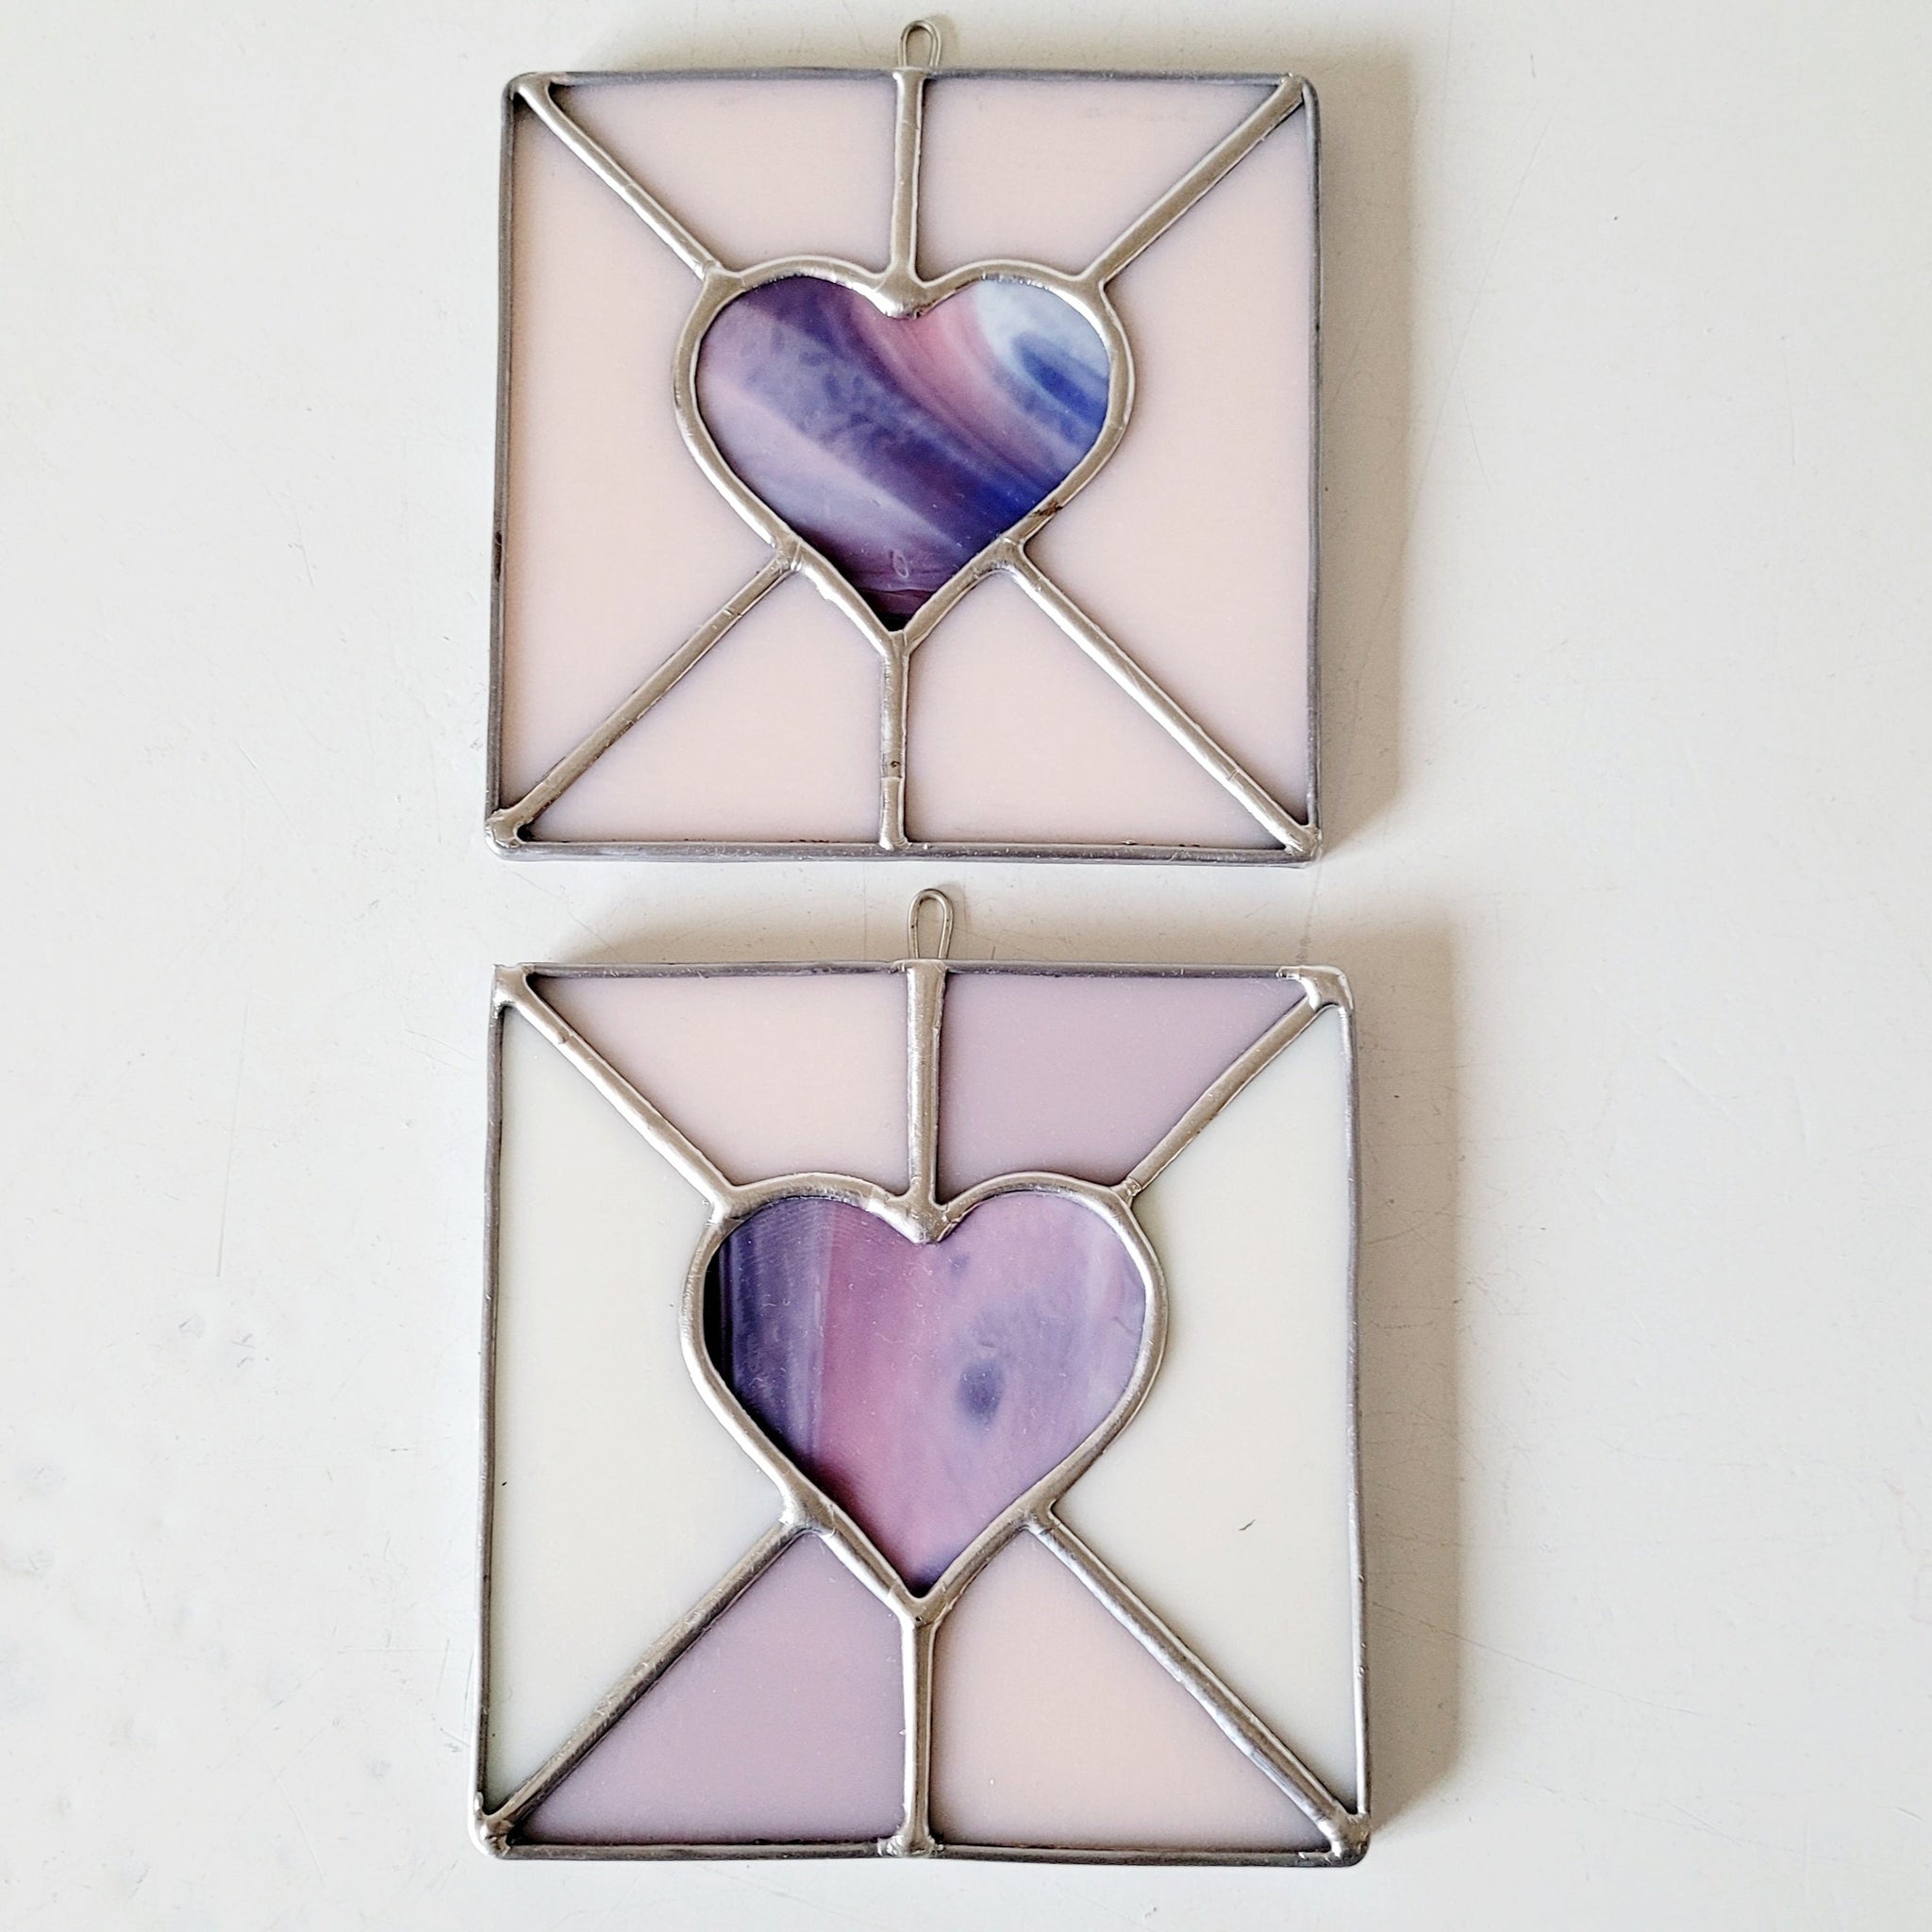 Pink Heart Box, Stained Glass